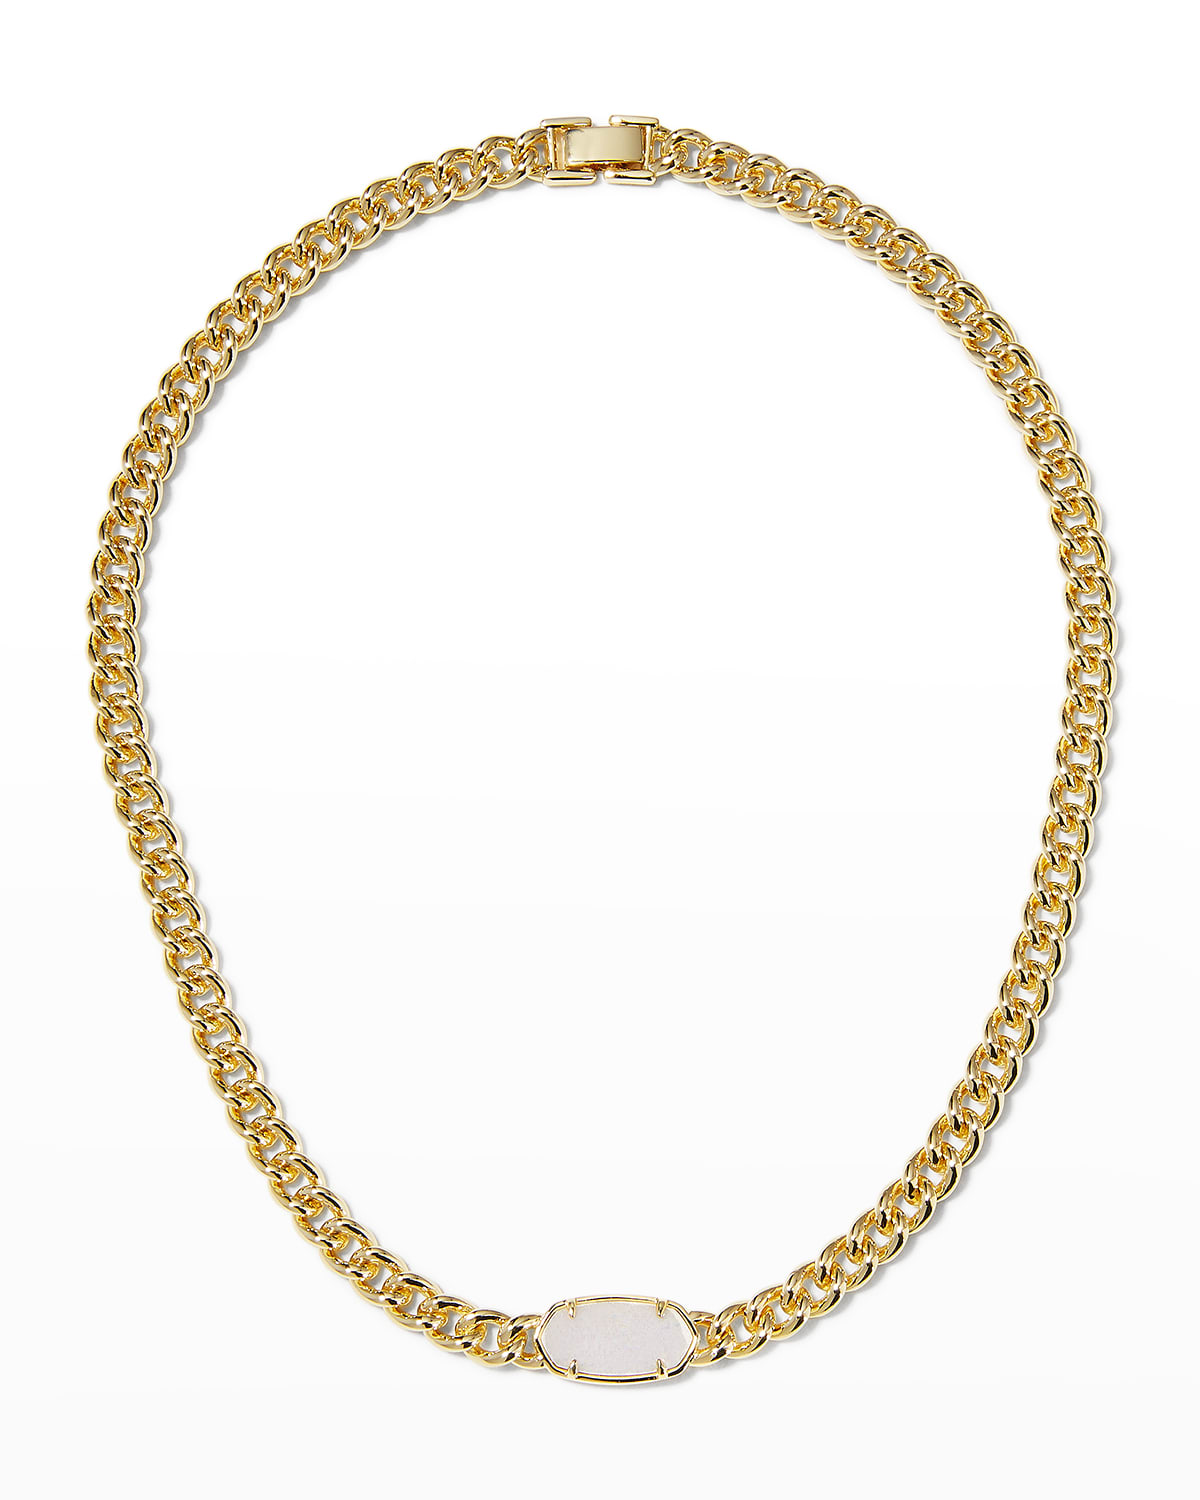 Jewel Tie 14K Yellow Gold 3.4mm Cuban Concaved Curb White Pave Diamond-Cut Hollow Necklace Chain with Secure Lobster Clasp